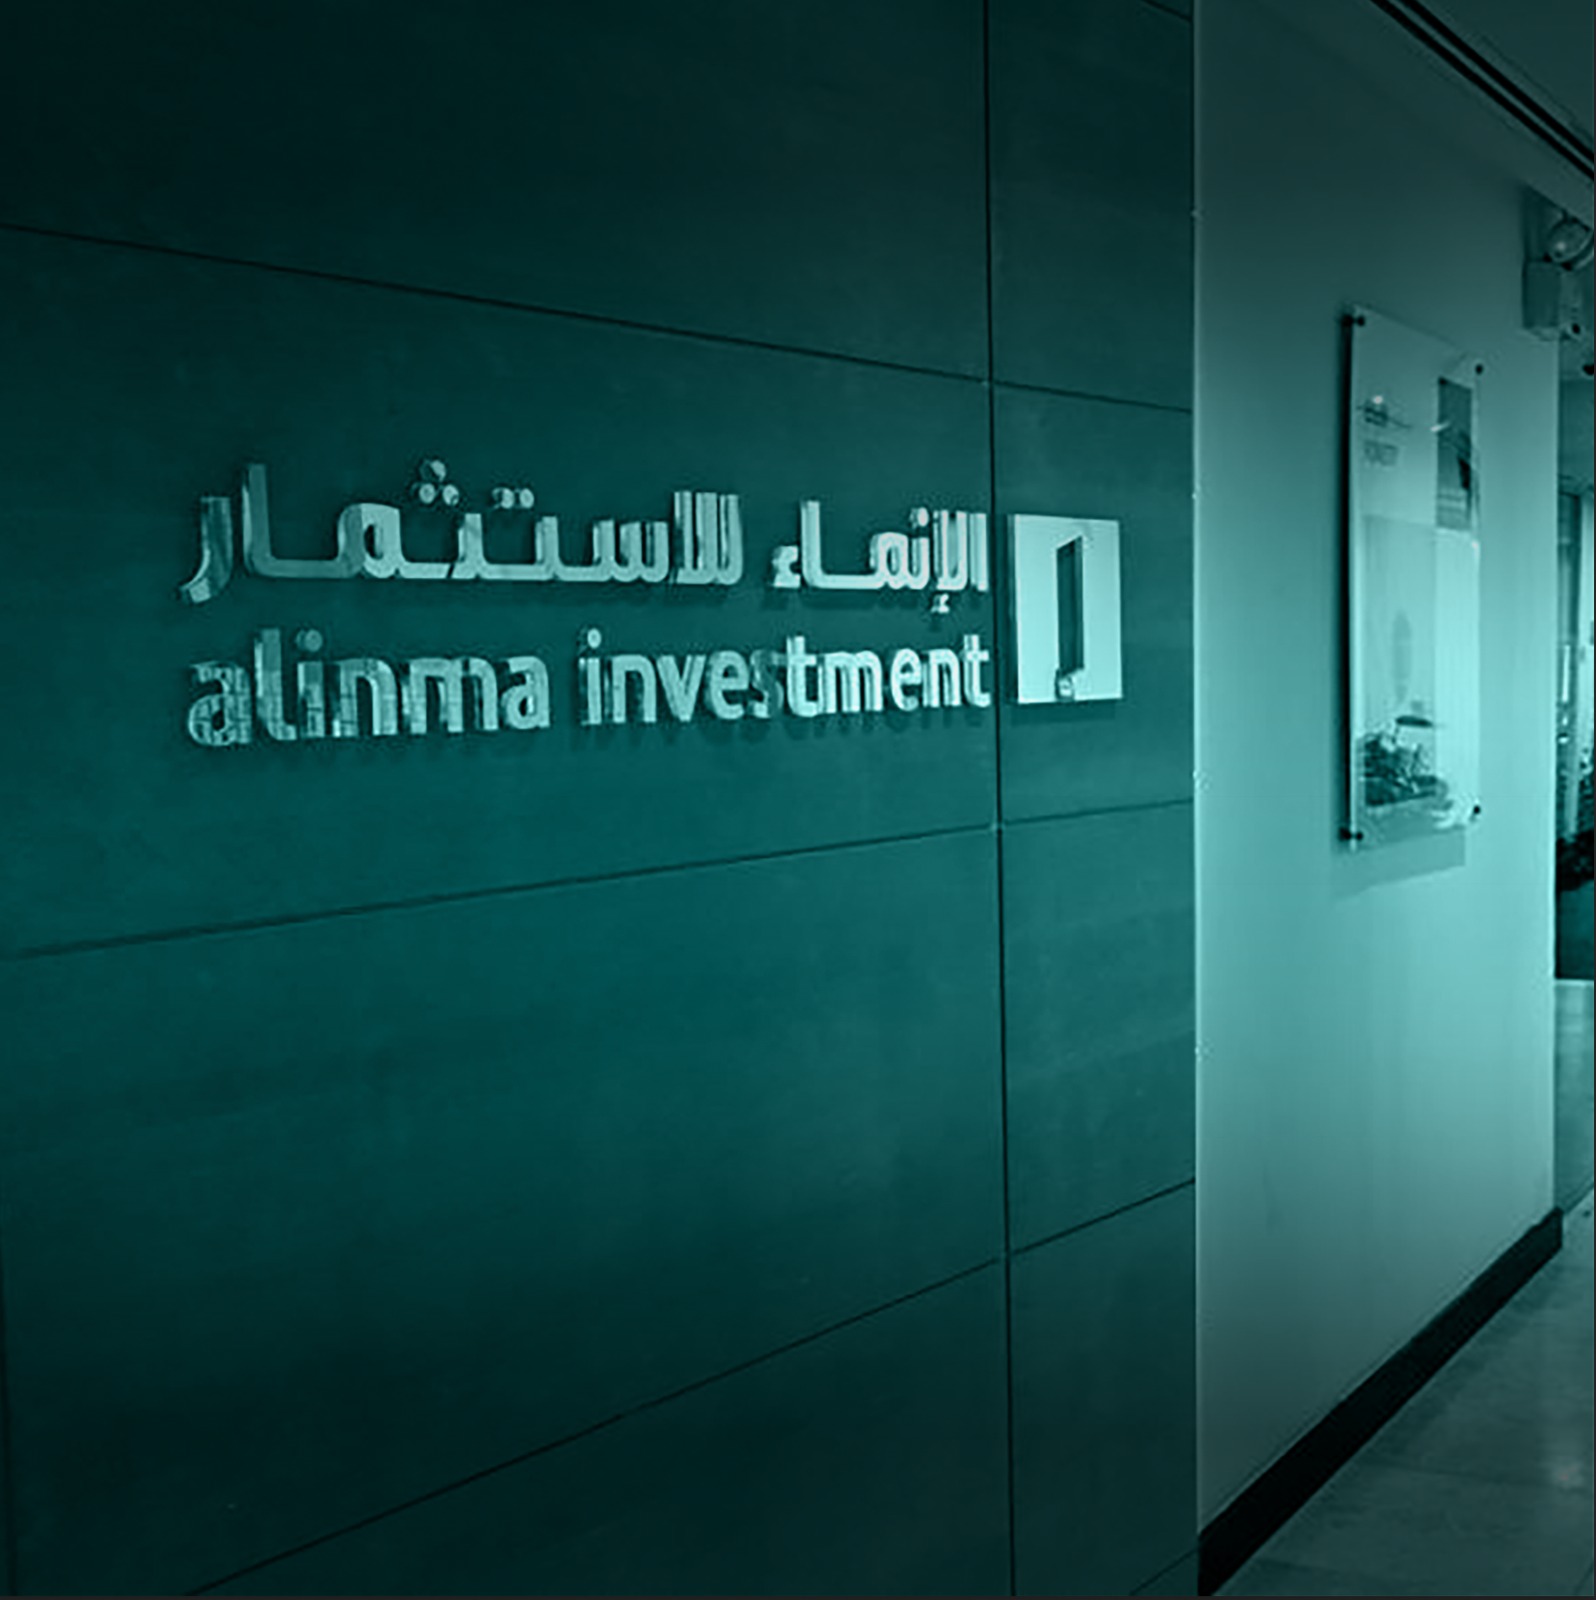 Alinma investment company announces an Addendum Announcement regarding the Announcement by Alinma investment Company for the occurrence of a specific event in Alinma Retail REIT Fund.